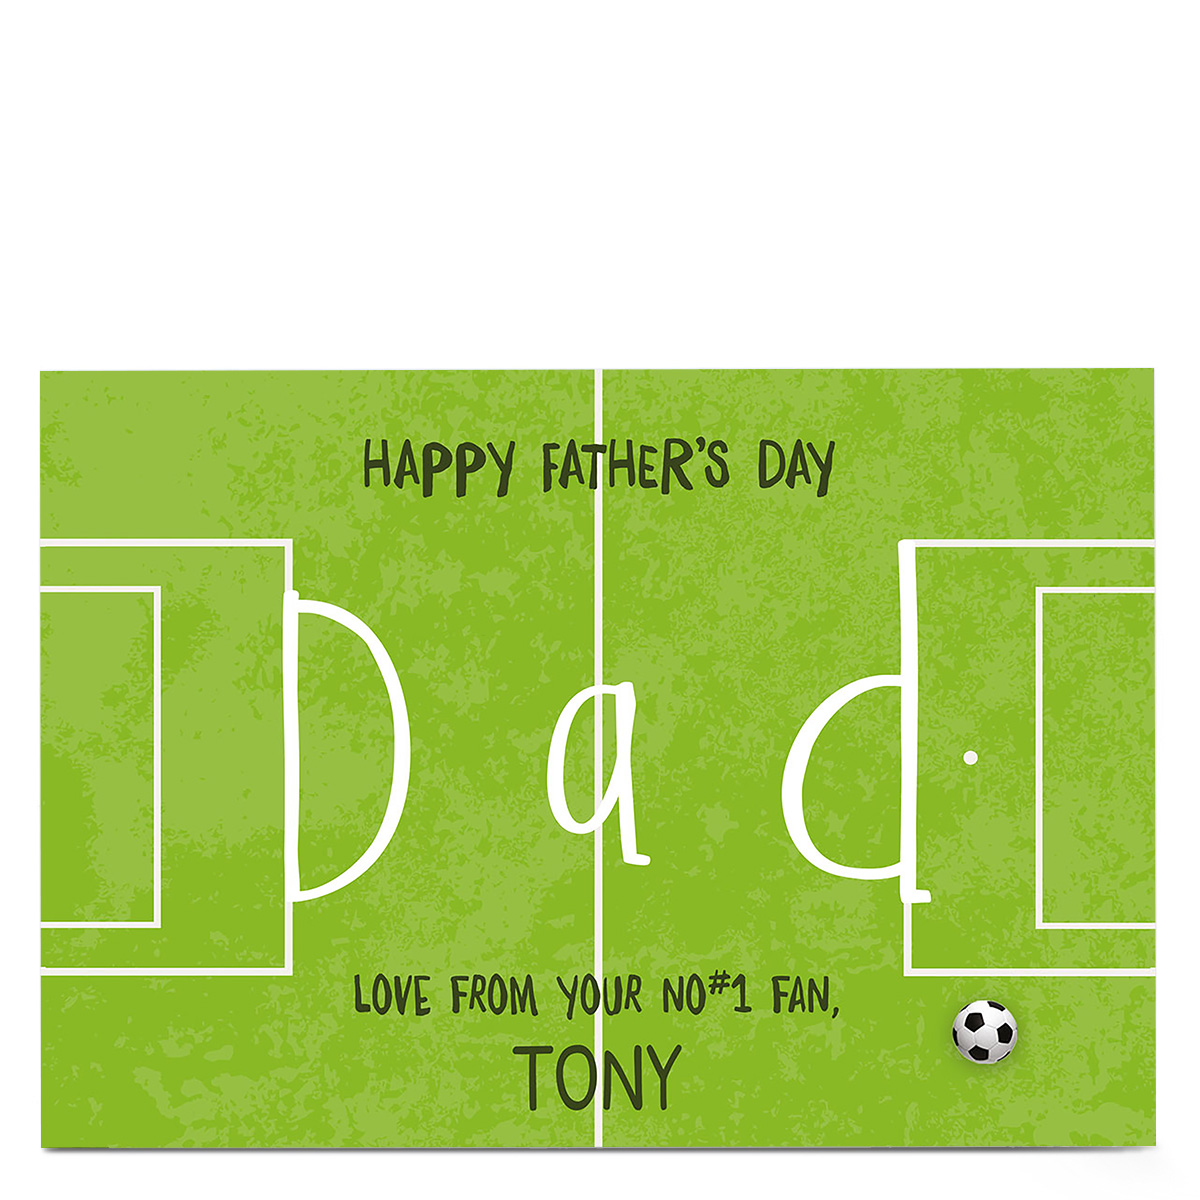 Personalised Father's Day Card - Your No 1 Fan